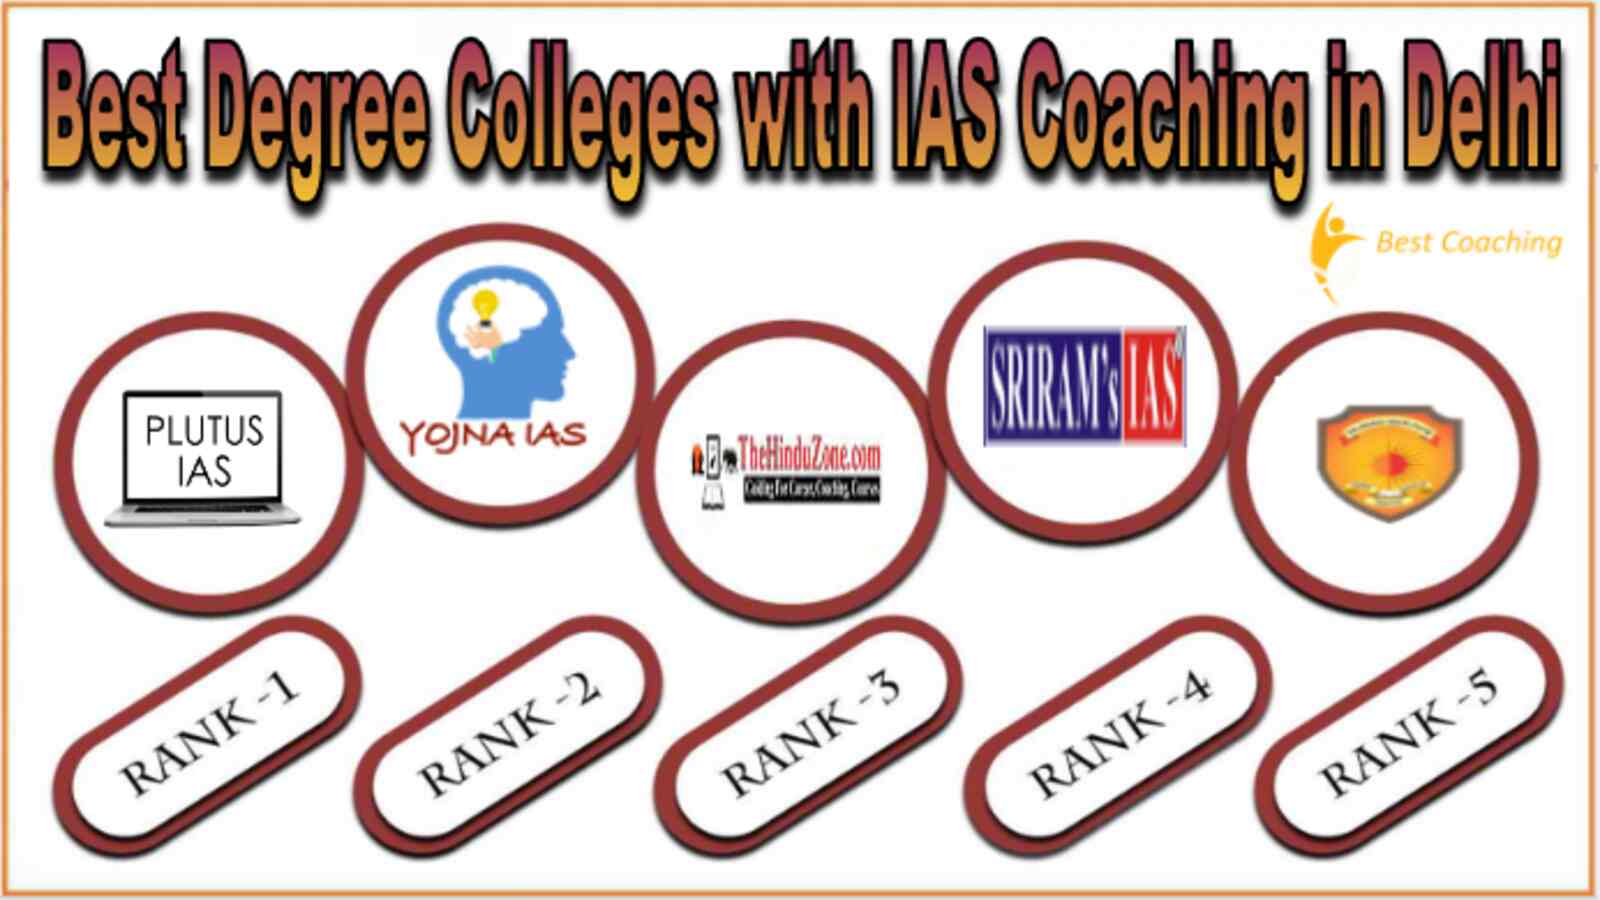 Best Degree Colleges with IAS Coaching in Delhi